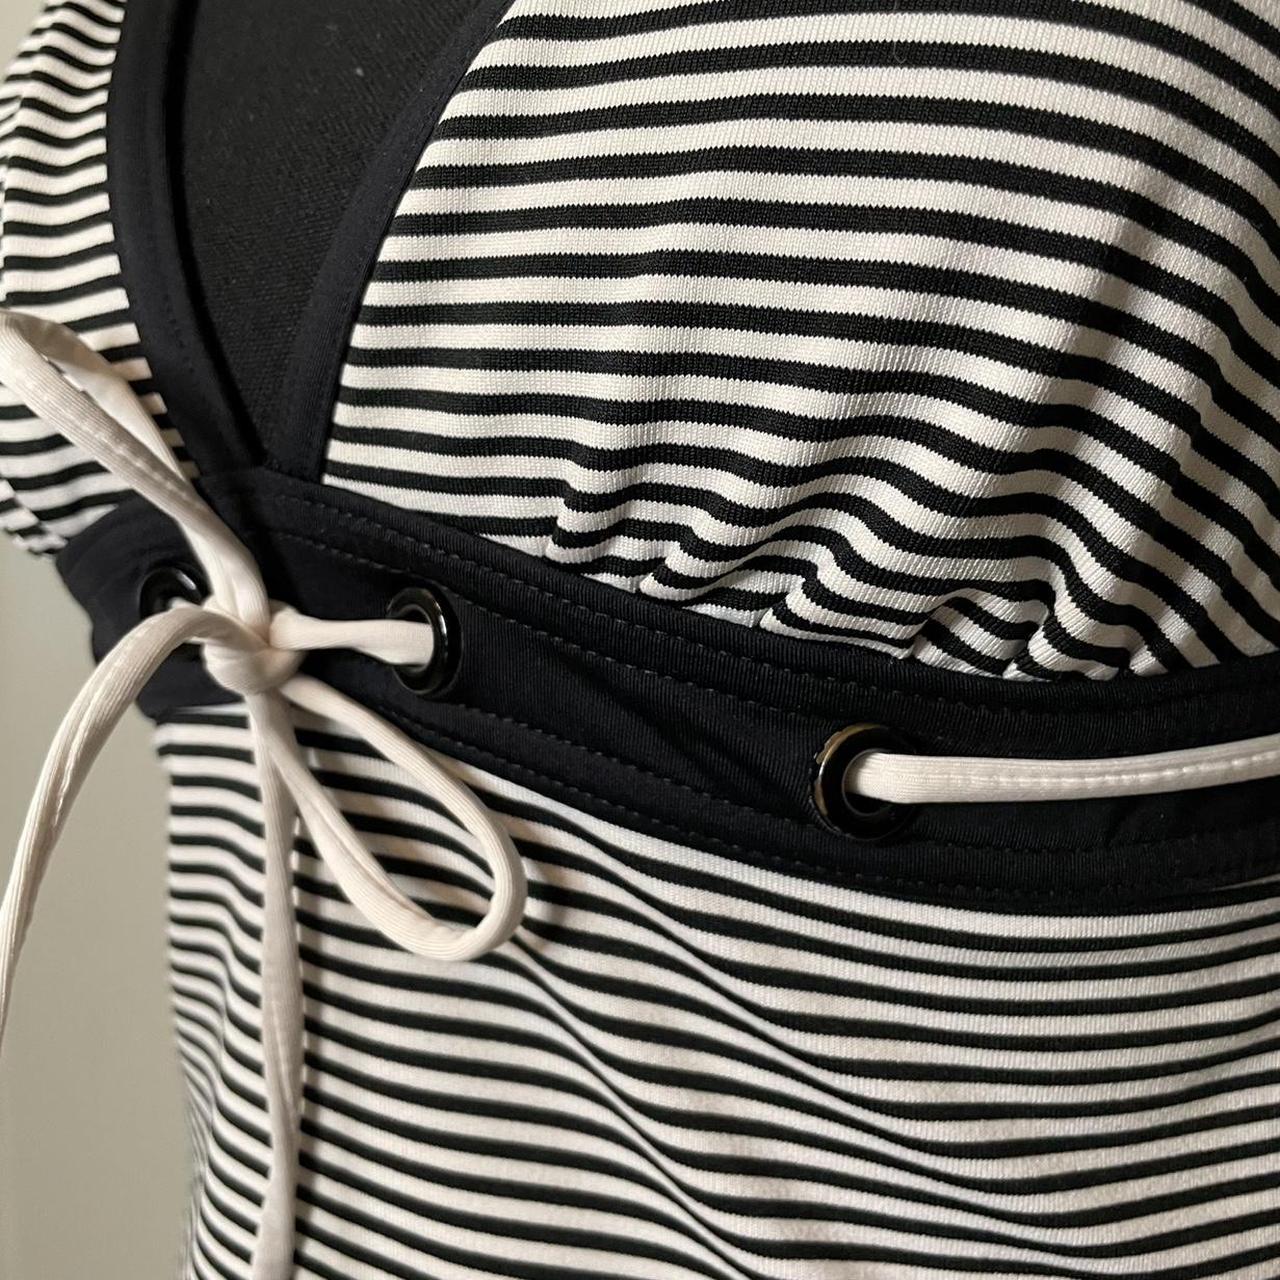 Product Image 4 - Striped swim top 

Black and